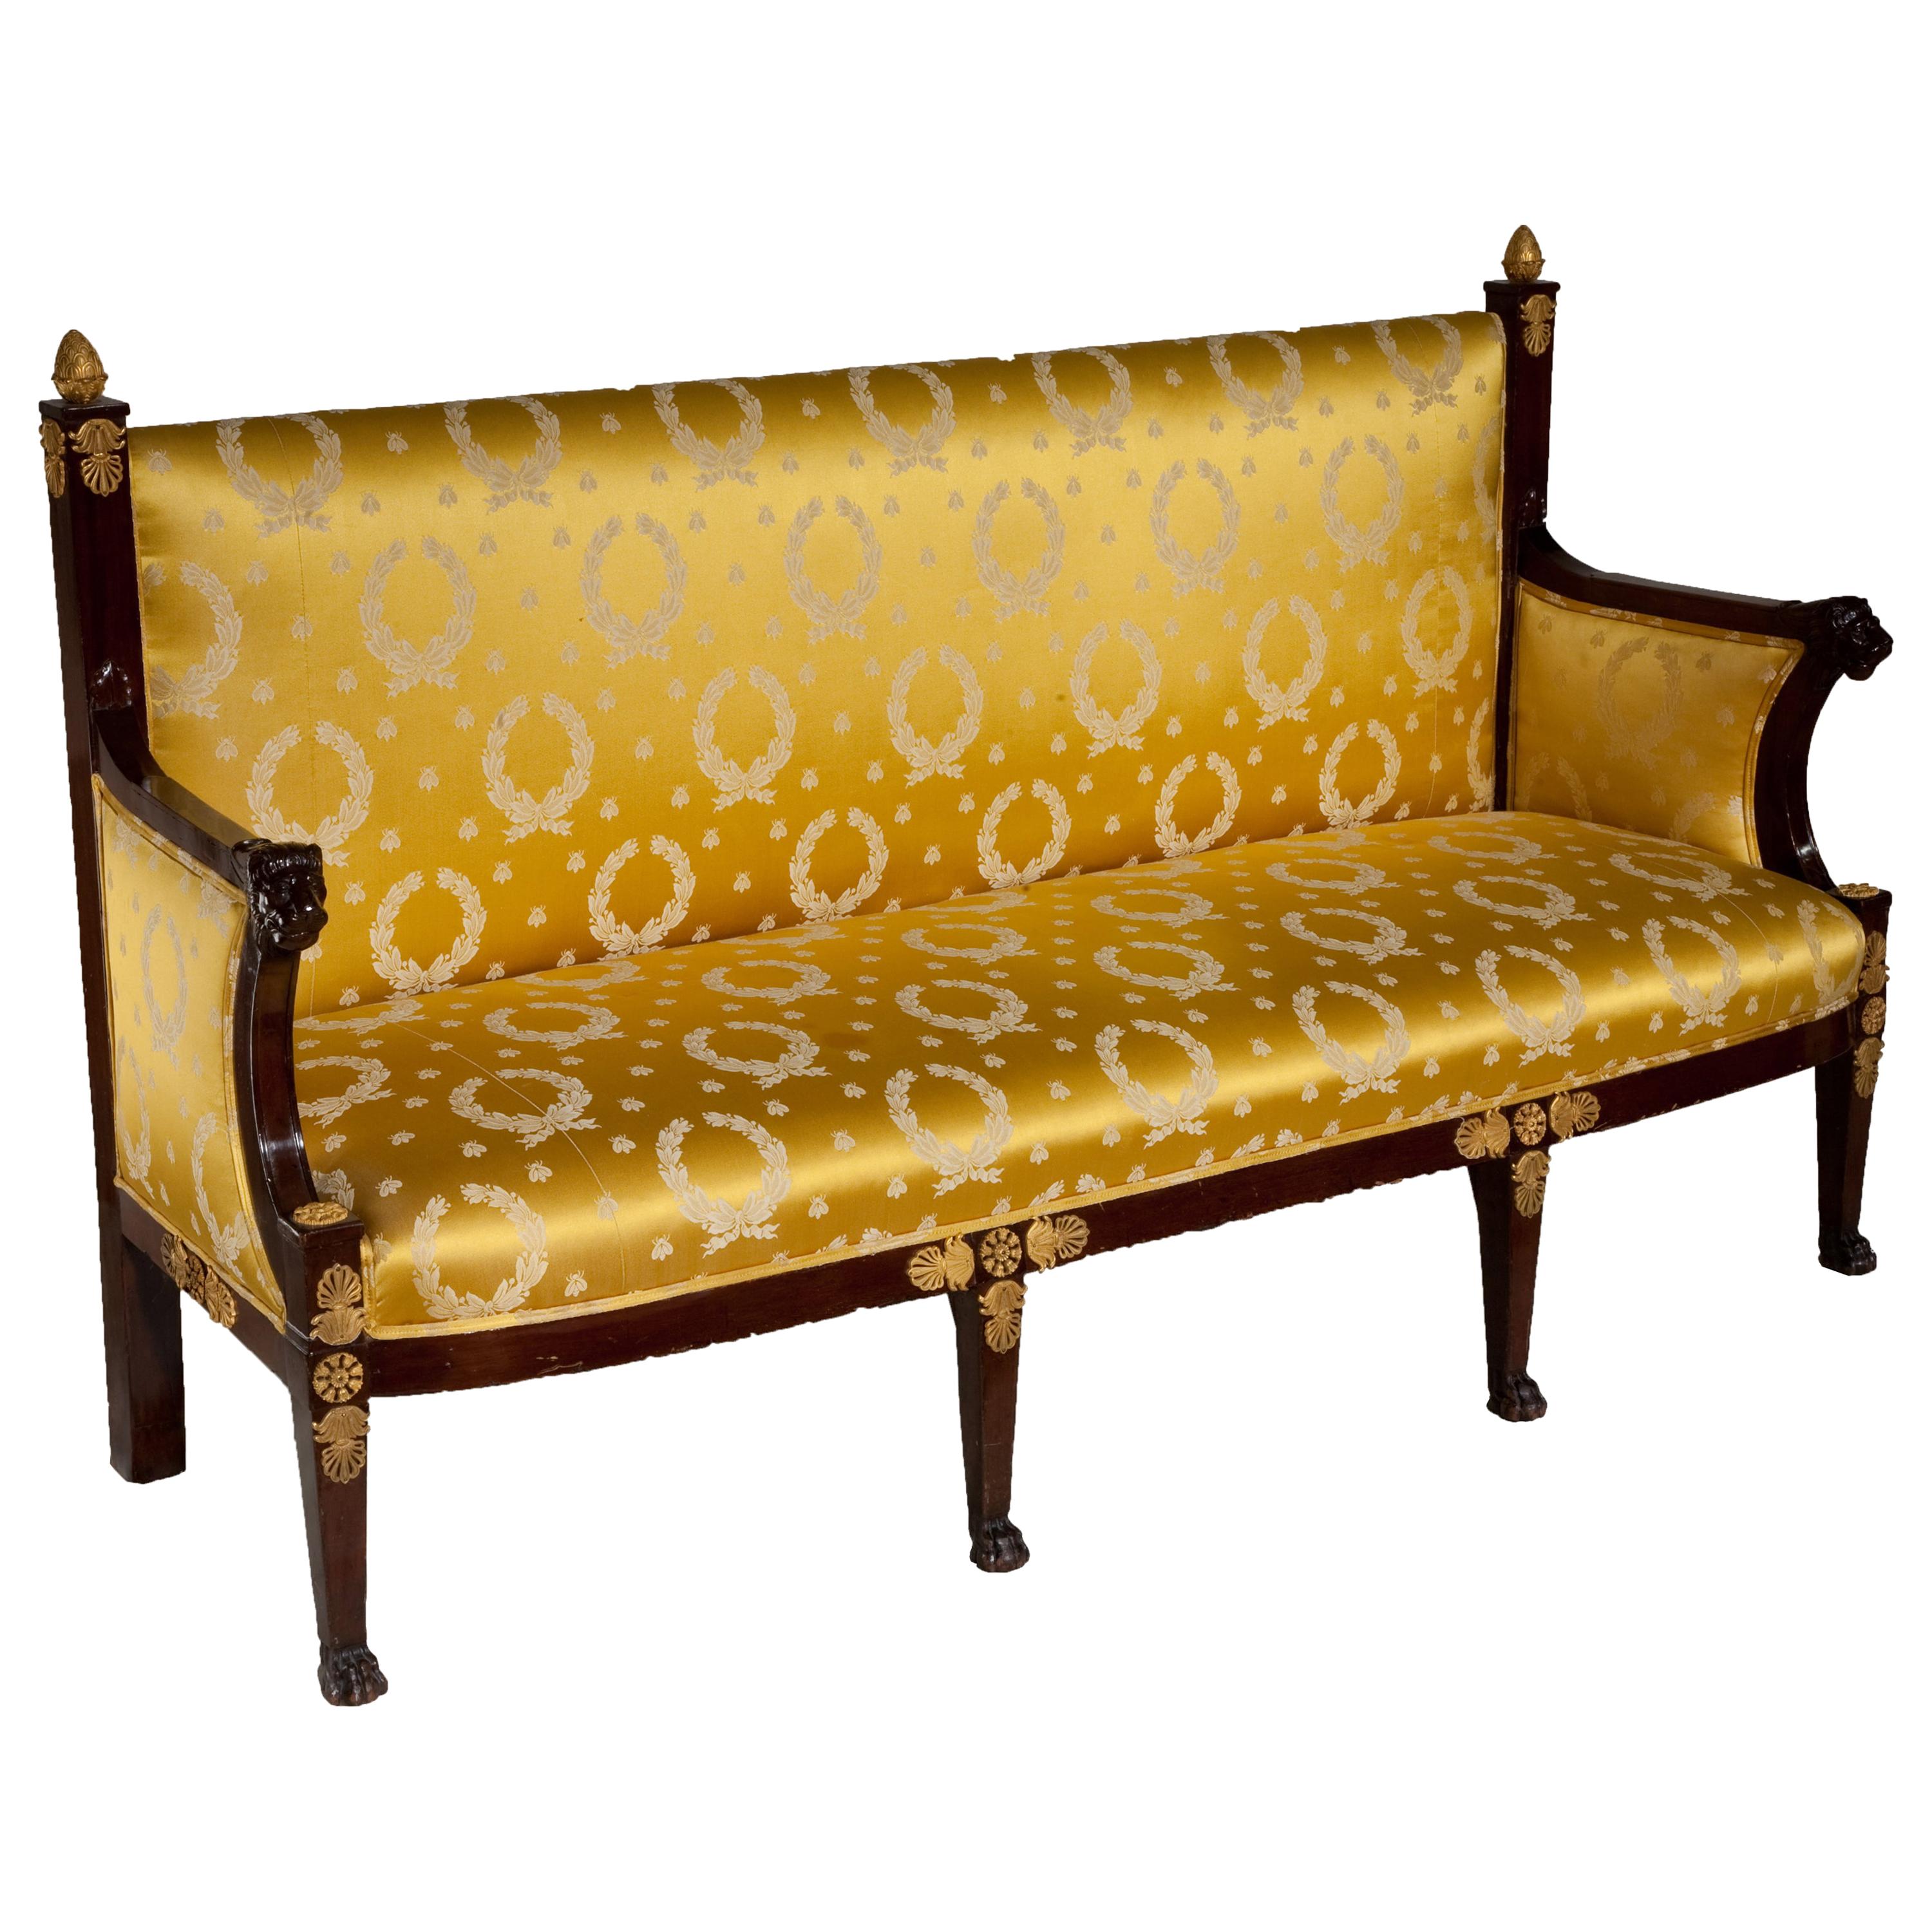 A Classic Directoire mahogany cannape with lion's head arm supports and paw feet, accented by Empire ormolu mounts and upholstered in gold Empire style silk yellow fabric.